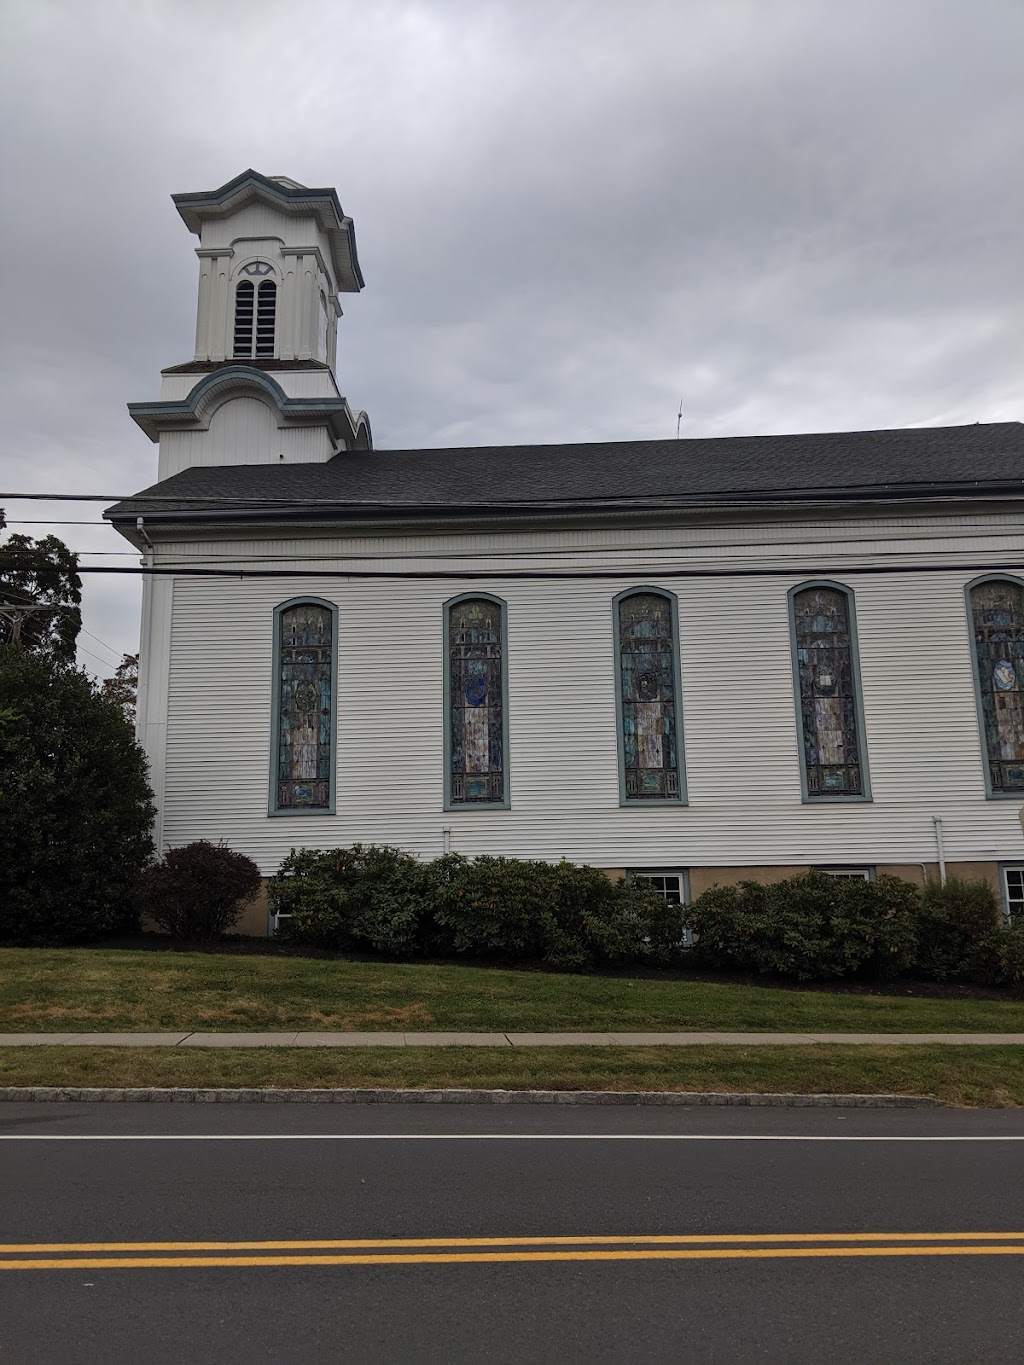 Annandale Reformed Church | 2 West St, Annandale, NJ 08801 | Phone: (908) 735-7218